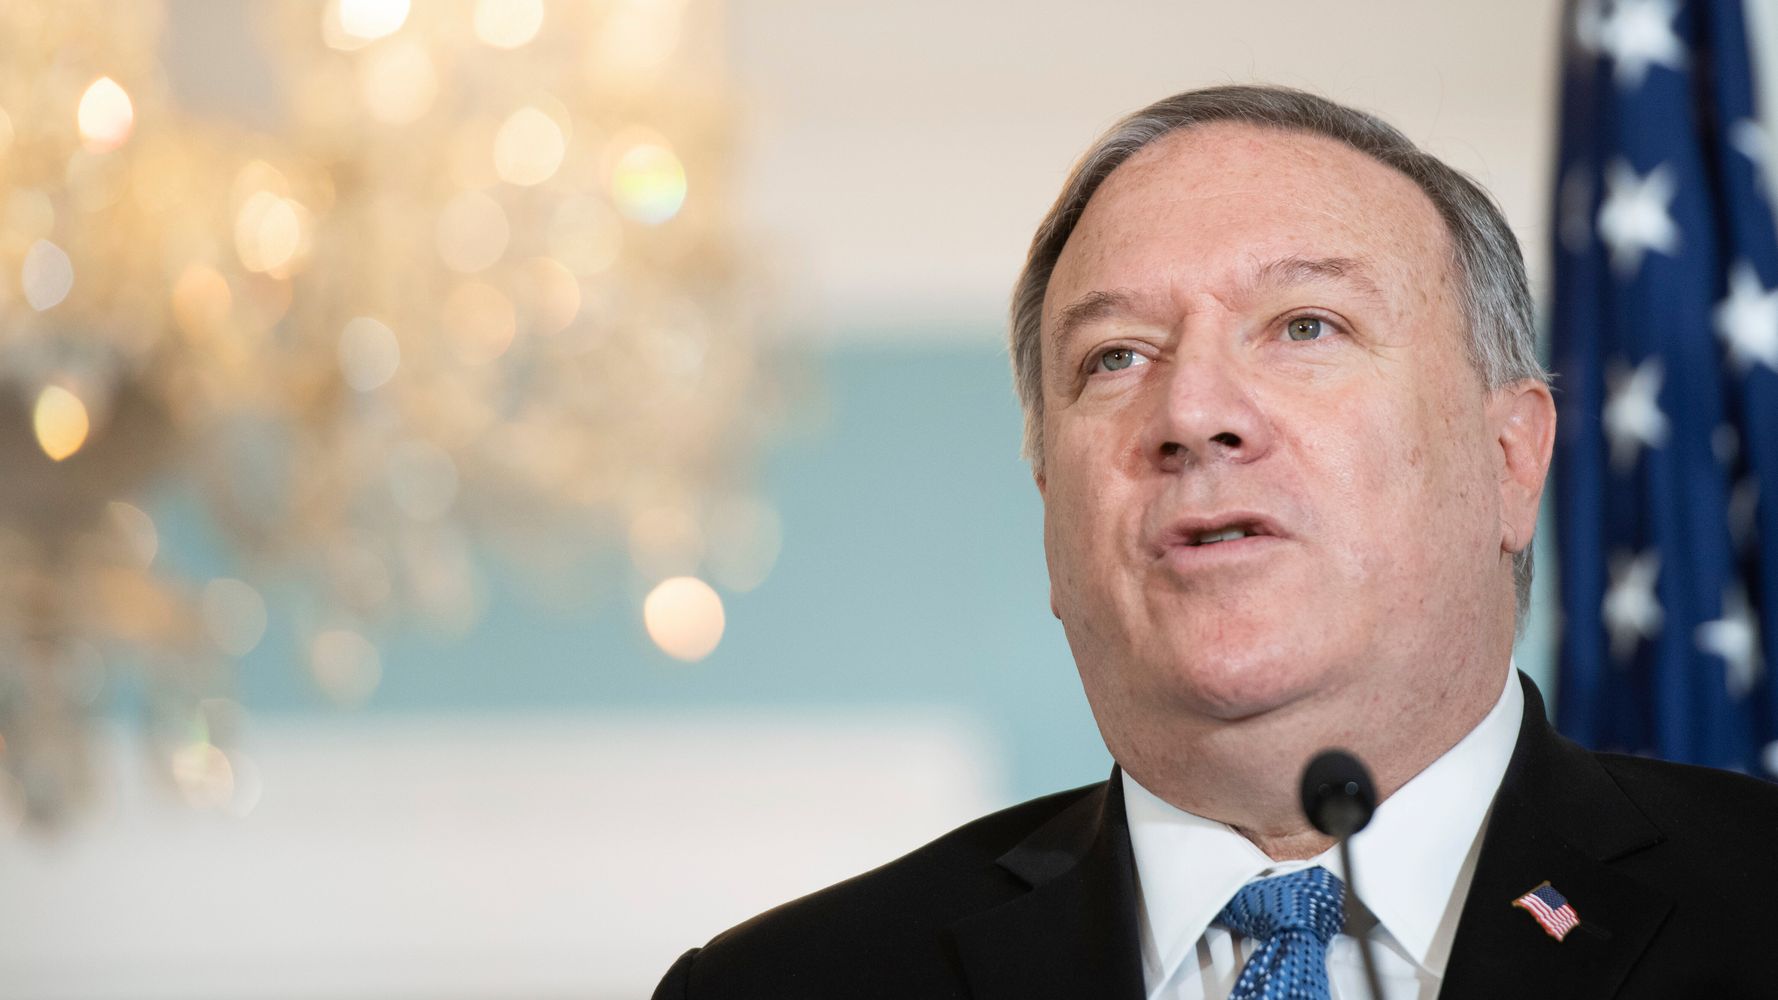 Mike Pompeo Sends Out 900 Invitations For One Big Holiday Party: Verslag